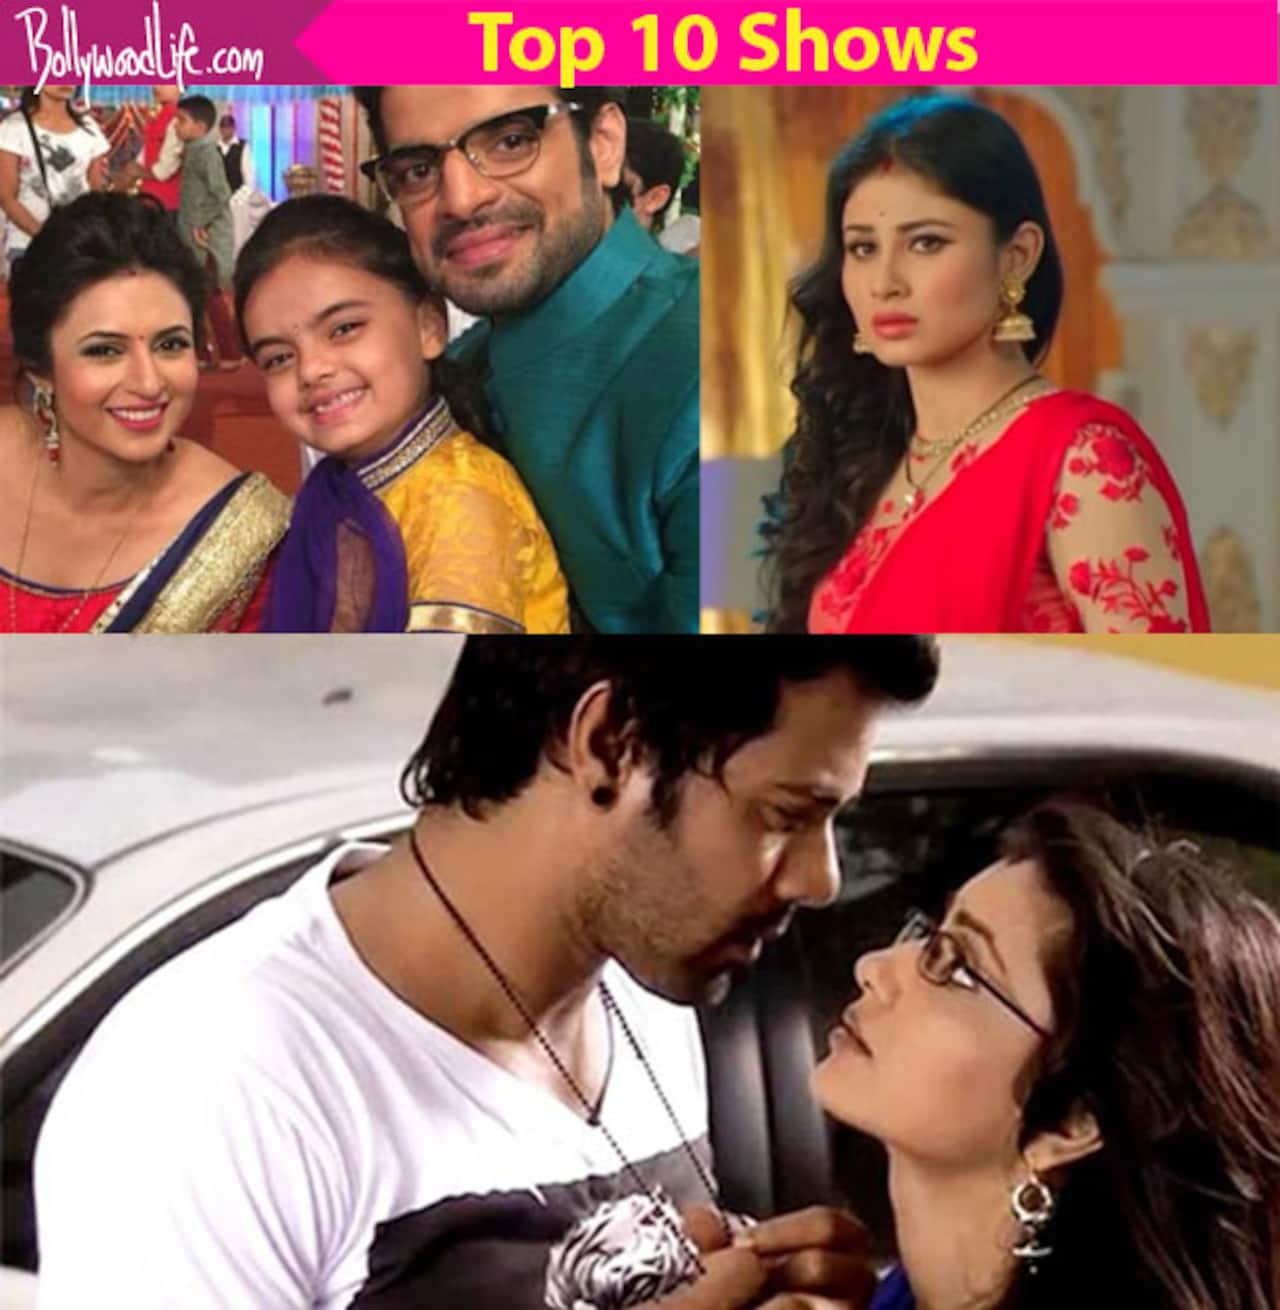 Divyanka Tripathi's Yeh Hai Mohabbatein back in the Top 5 in BARC Report Week 47 - check out Top 10 shows